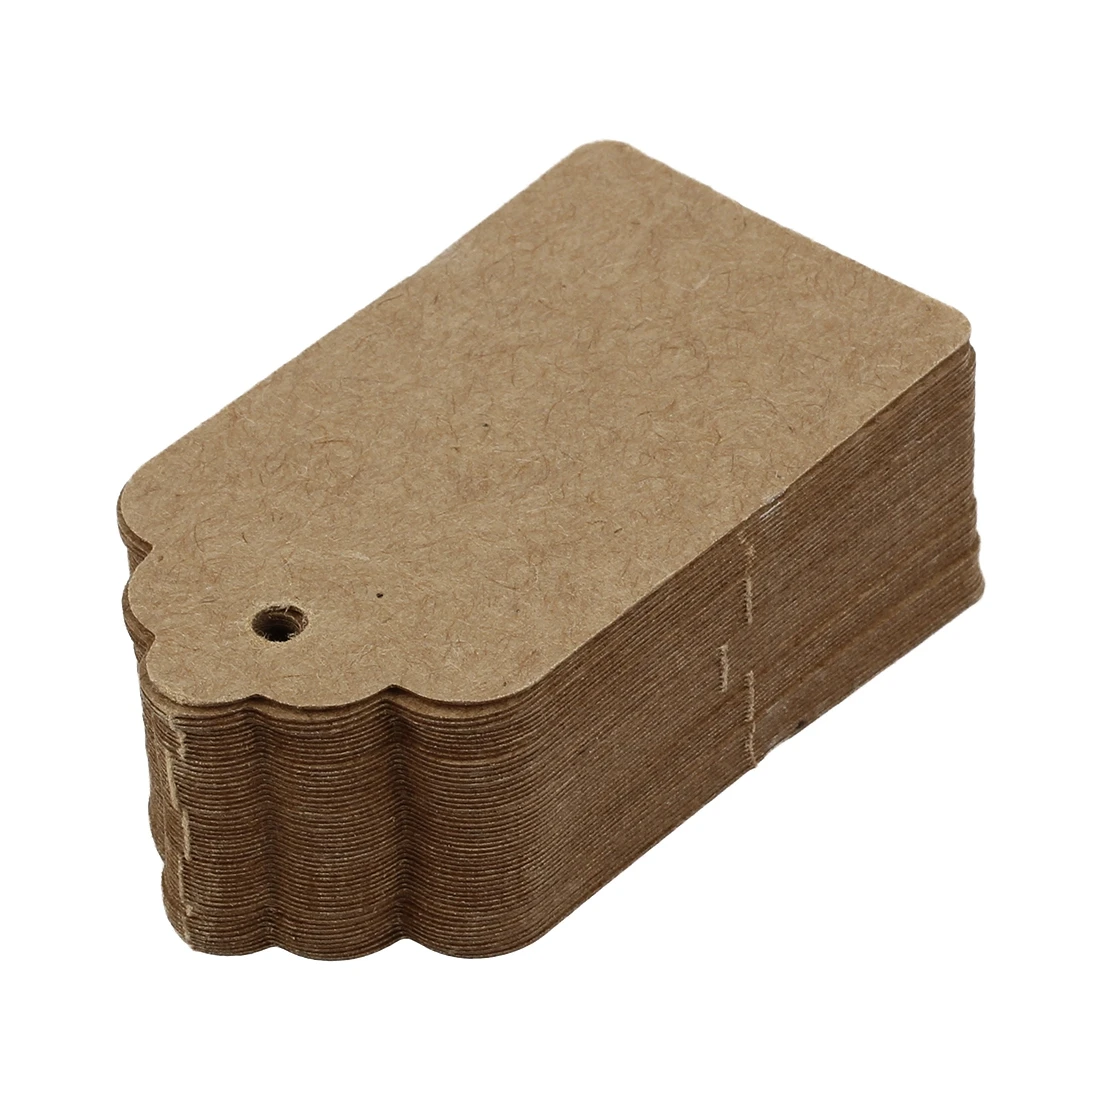 

Pack 50 Rustic 40mmx70mm Scalloped Kraft Paper Card,Blank Brown Tag,DIY Tag,Luggage Tag,Price Label - Small (50)